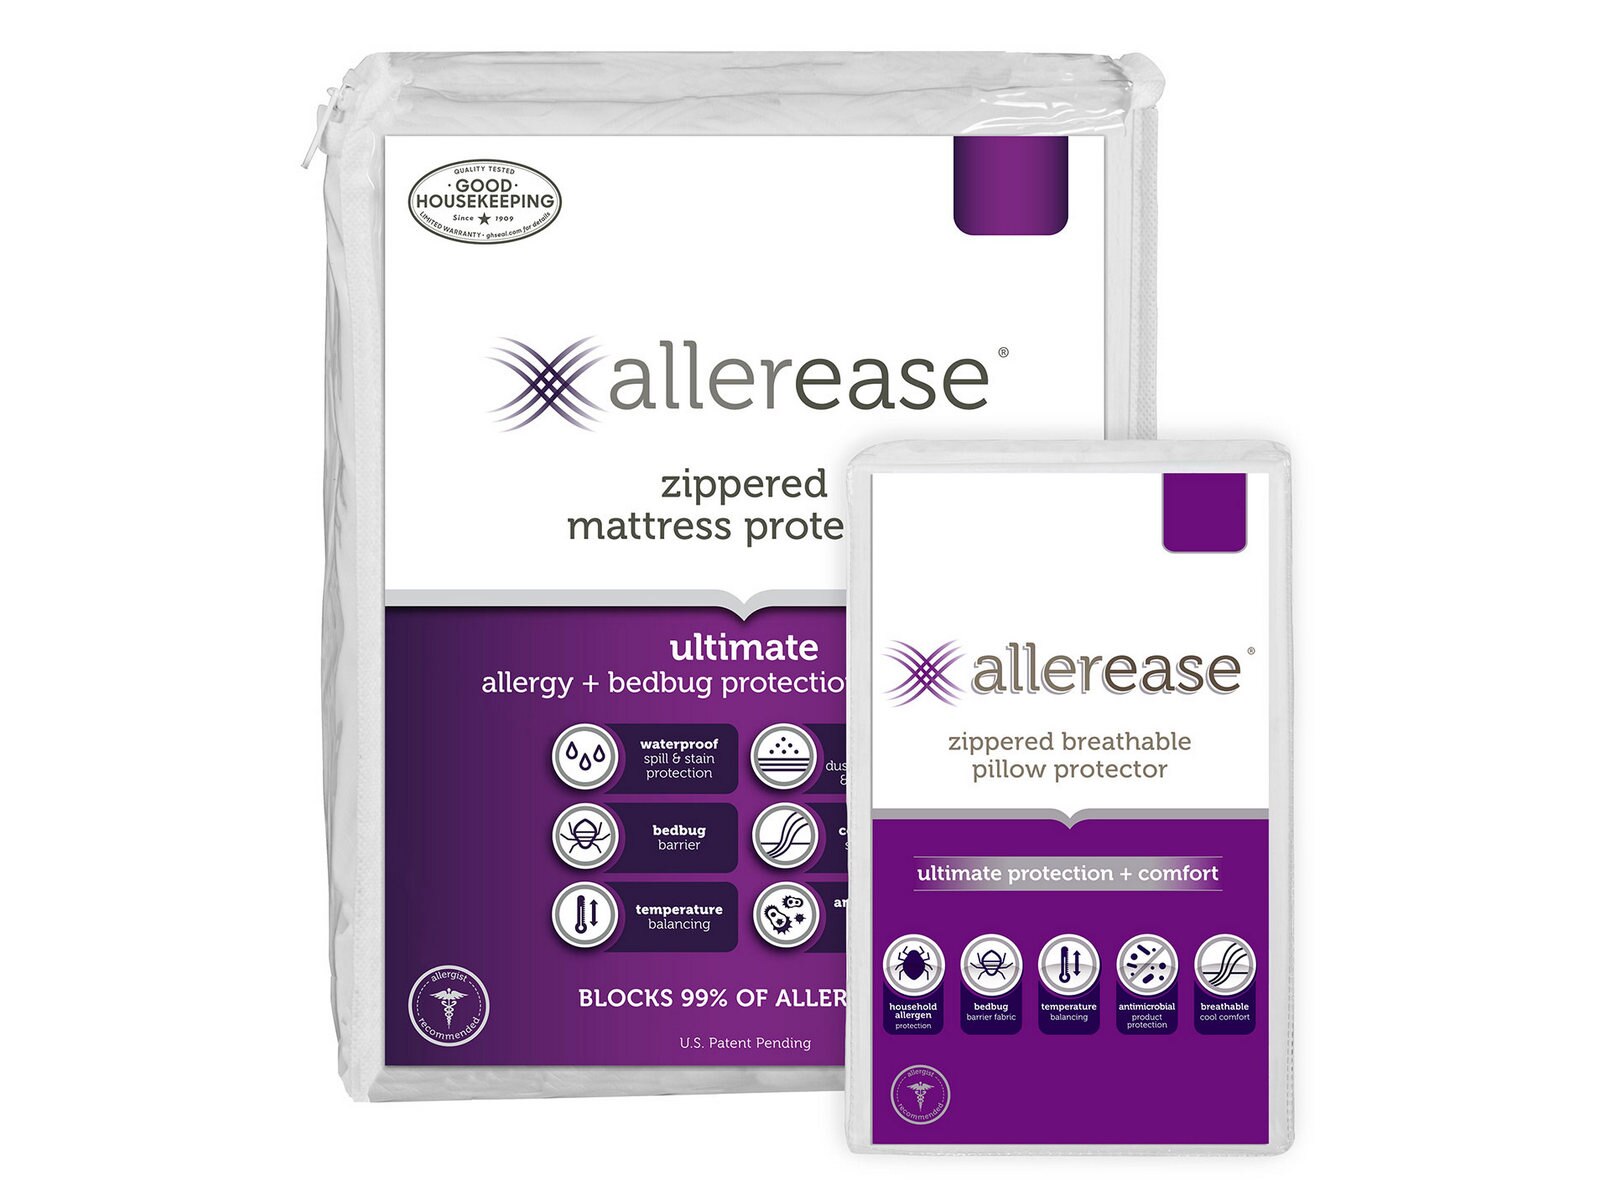 allerease ultimate mattress protector king